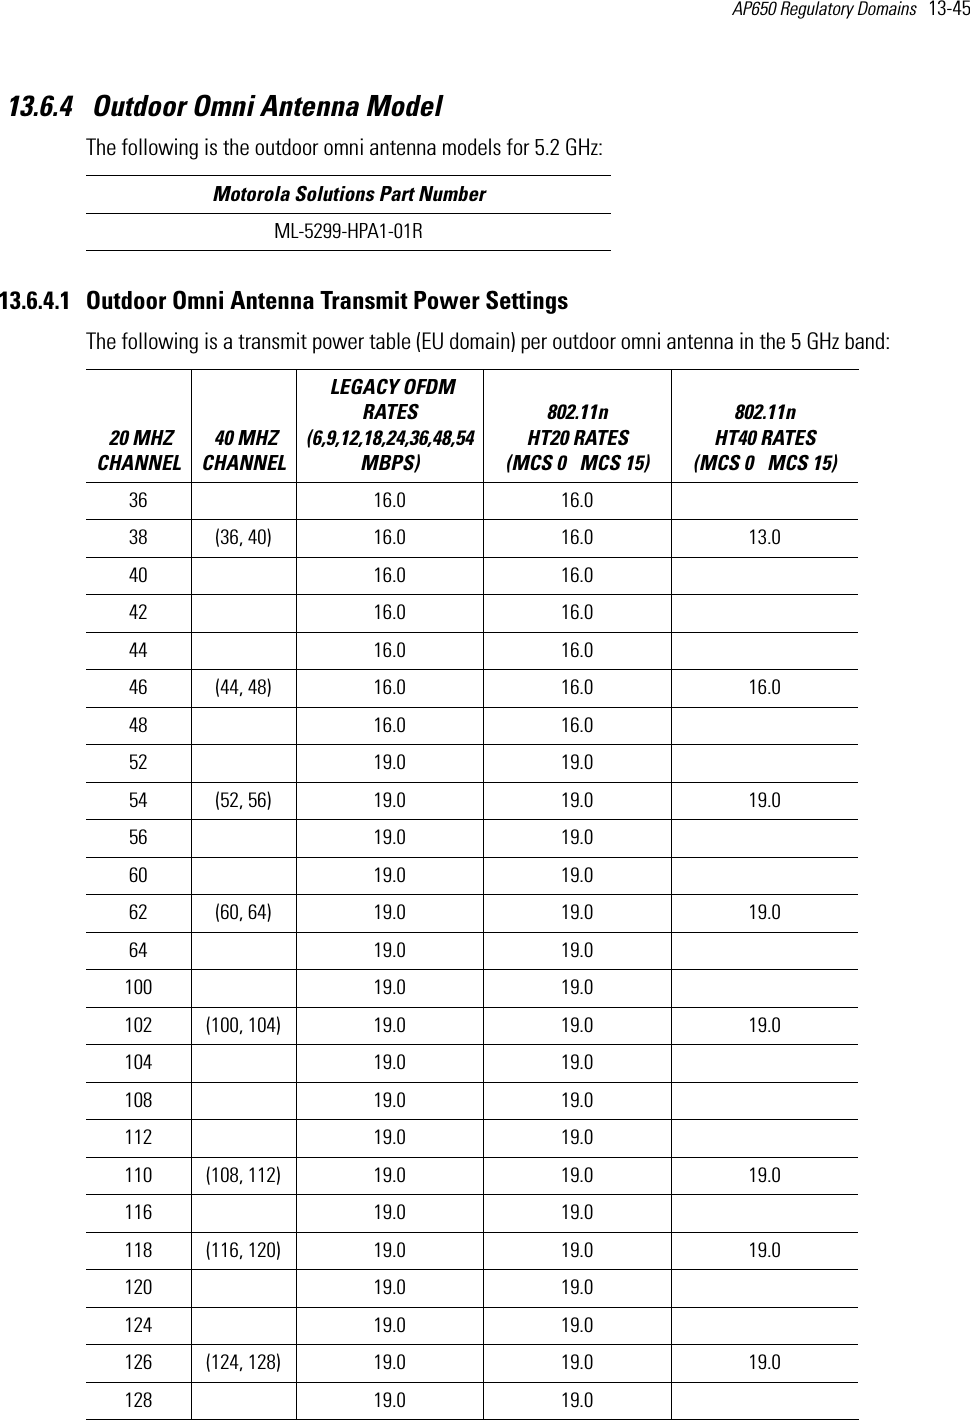 AP650 Regulatory Domains   13-45 13.6.4  Outdoor Omni Antenna ModelThe following is the outdoor omni antenna models for 5.2 GHz:13.6.4.1 Outdoor Omni Antenna Transmit Power SettingsThe following is a transmit power table (EU domain) per outdoor omni antenna in the 5 GHz band: Motorola Solutions Part NumberML-5299-HPA1-01R 20 MHZ CHANNEL 40 MHZ CHANNEL LEGACY OFDM RATES (6,9,12,18,24,36,48,54 MBPS) 802.11n HT20 RATES (MCS 0   MCS 15)802.11n HT40 RATES (MCS 0   MCS 15) 36  16.0 16.038 (36, 40) 16.0 16.0 13.040  16.0 16.042  16.0 16.044  16.0 16.046 (44, 48) 16.0 16.0 16.048  16.0 16.052  19.0 19.054 (52, 56) 19.0 19.0 19.056  19.0 19.060  19.0 19.062 (60, 64) 19.0 19.0 19.064  19.0 19.0100  19.0 19.0102 (100, 104) 19.0 19.0 19.0104  19.0 19.0108  19.0 19.0112  19.0 19.0110 (108, 112) 19.0 19.0 19.0116  19.0 19.0118 (116, 120) 19.0 19.0 19.0120  19.0 19.0  124  19.0 19.0  126 (124, 128) 19.0 19.0 19.0128  19.0 19.0  